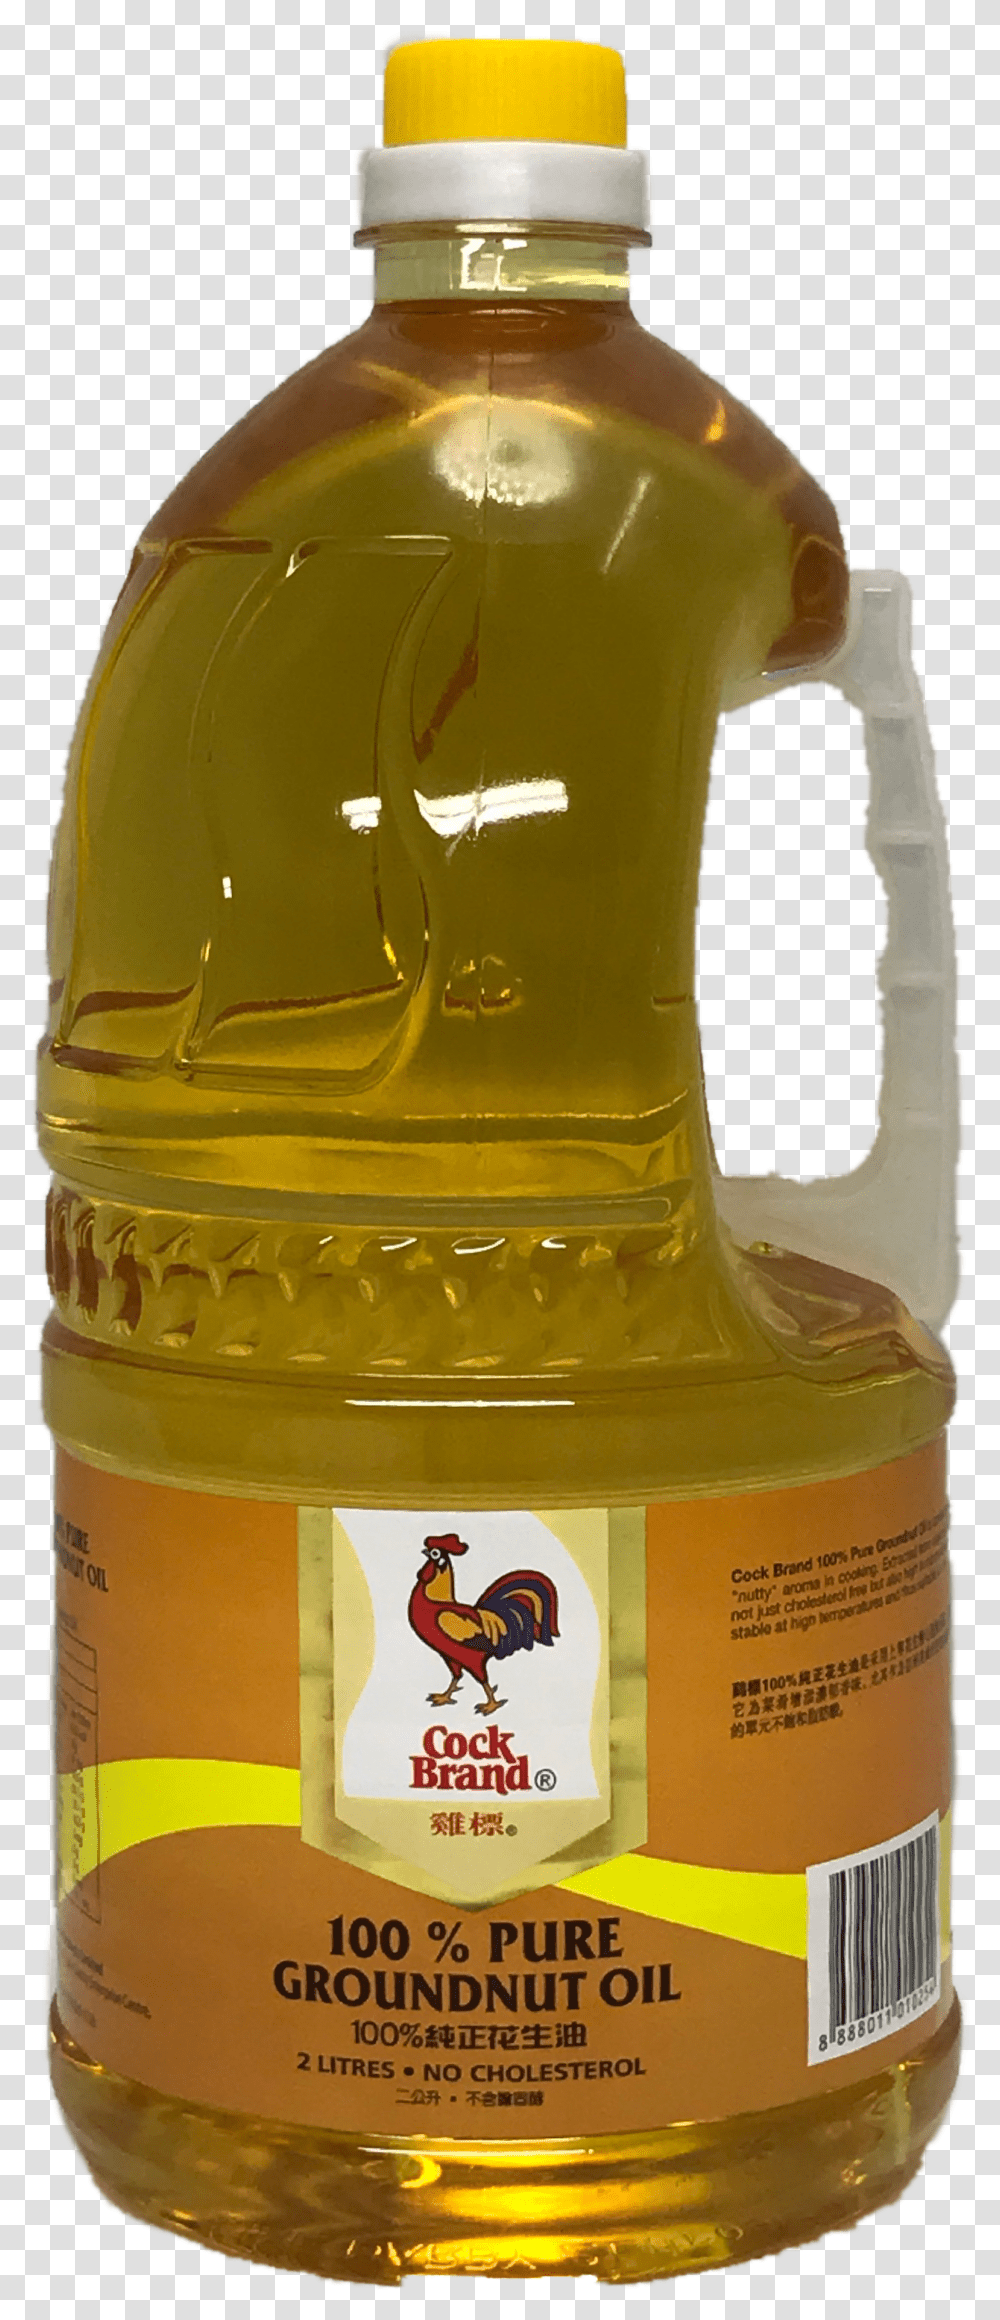 Cock Brand 100 Pure Groundnut Oil 2lTitle Cock Cock Brand Groundnut Oil Transparent Png